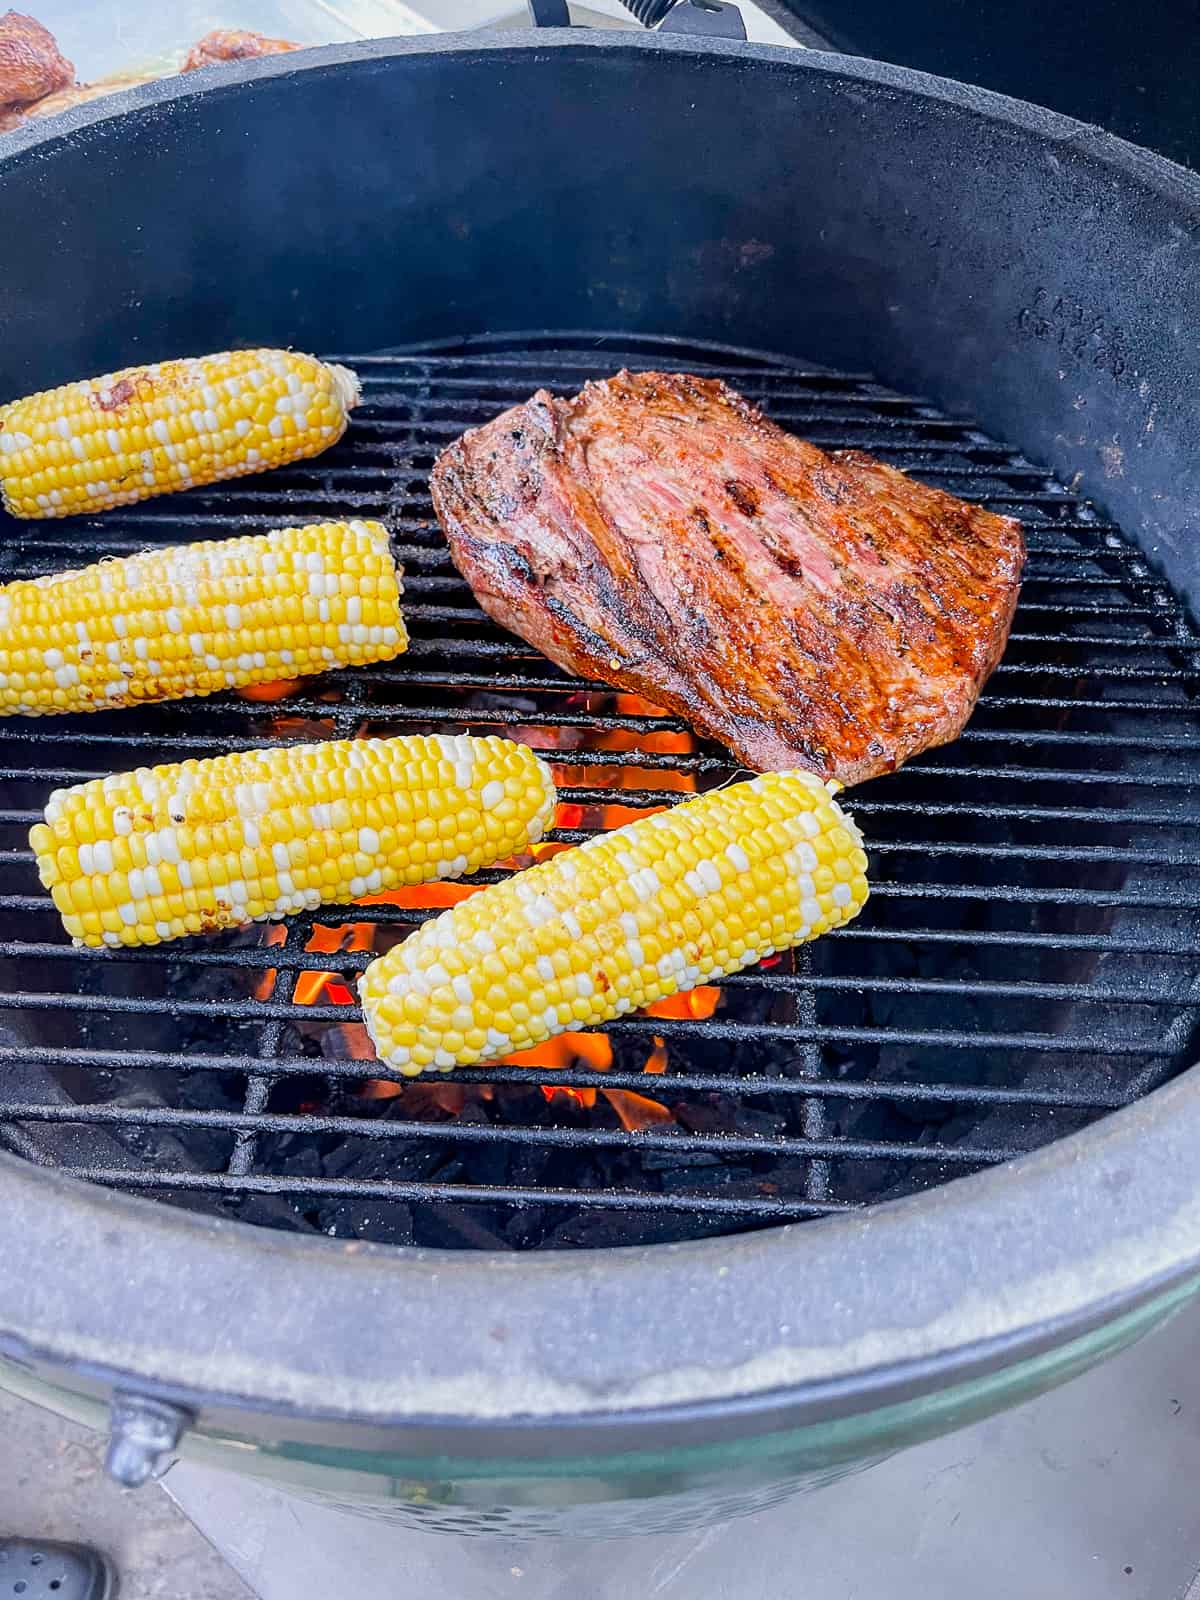 A big green egg with a flank steak and some ears of corn.